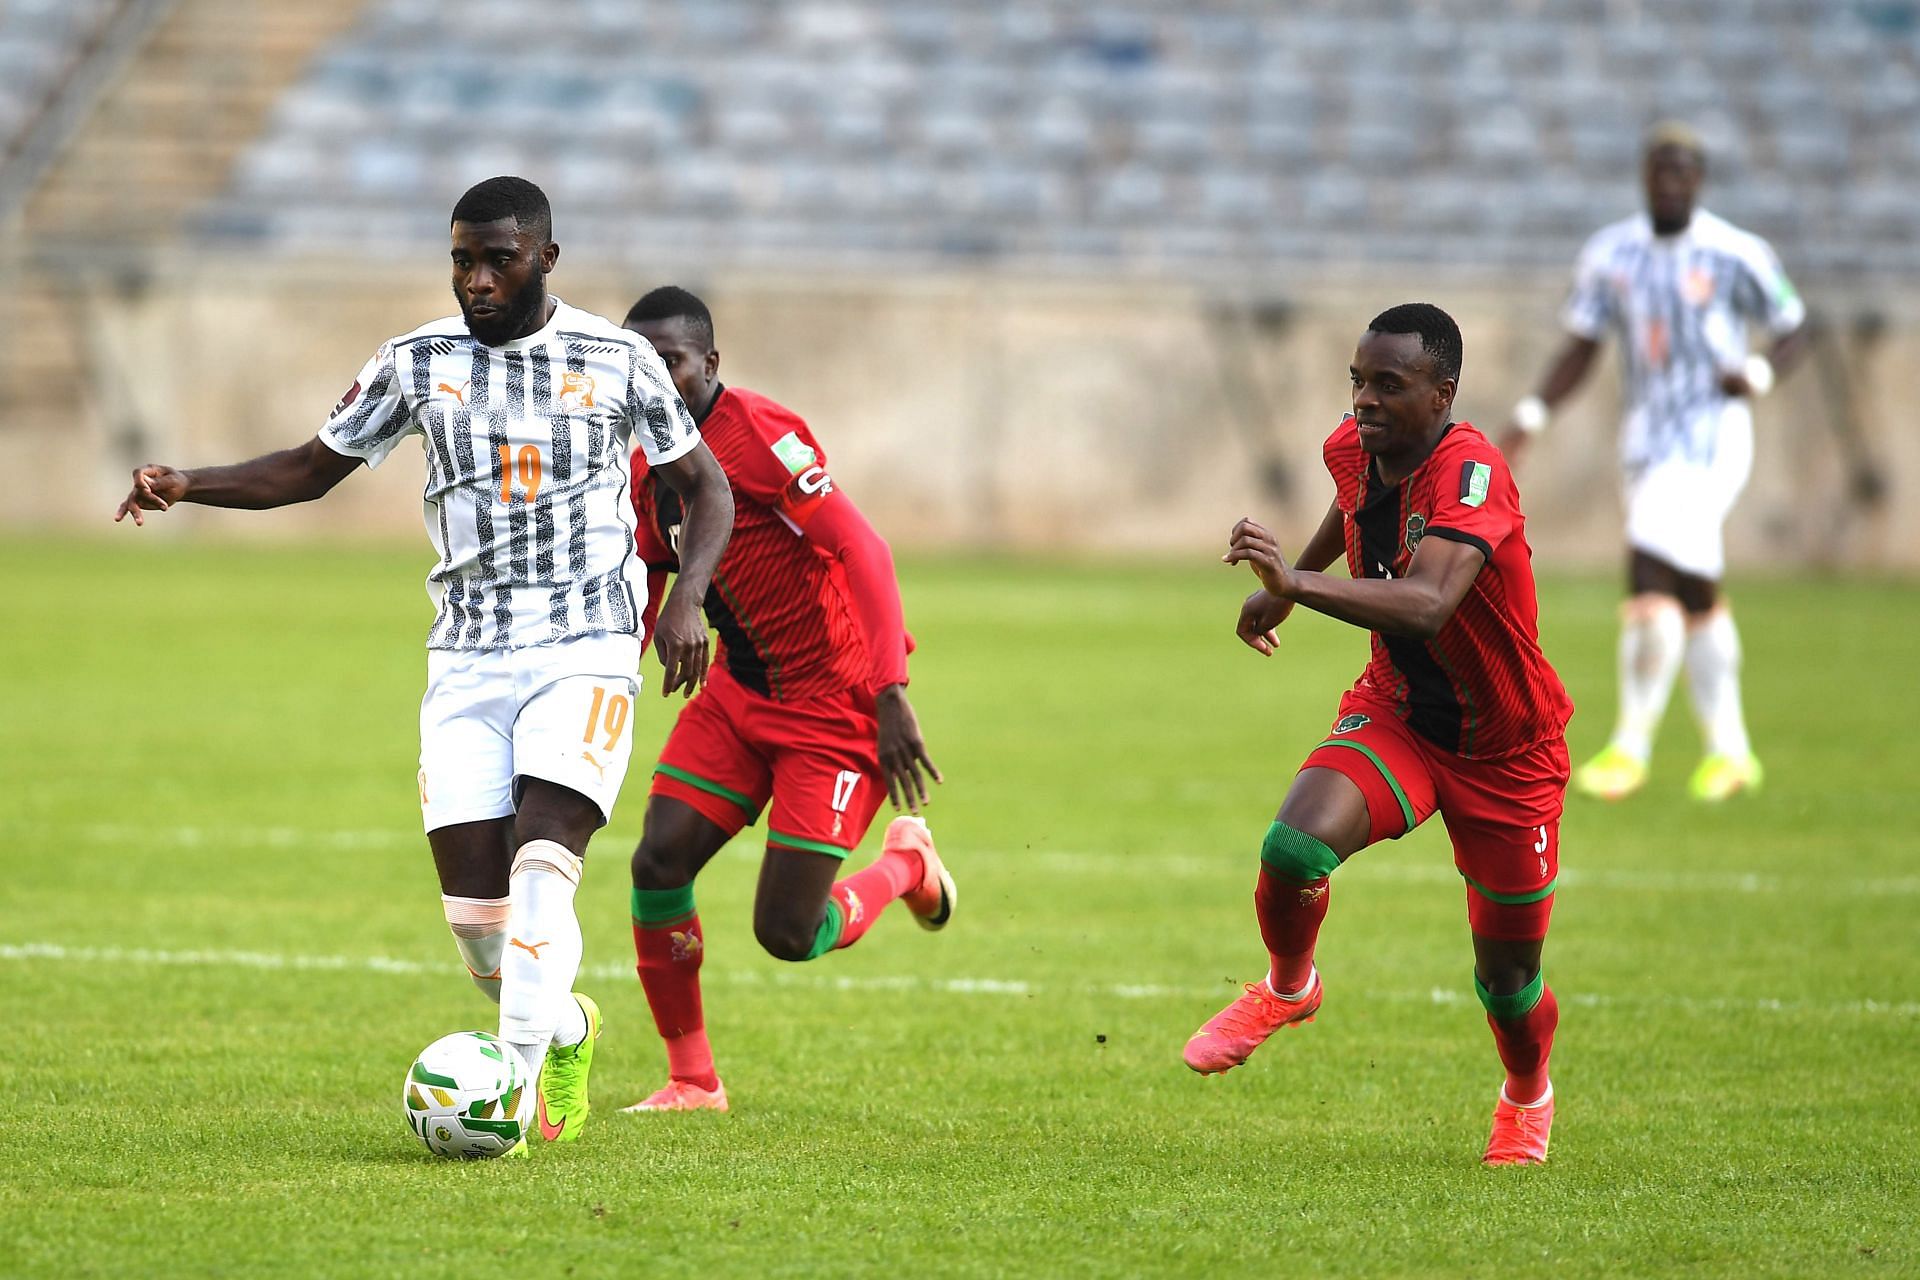 Malawi will face Guinea on Monday - Africa Cup of Nations